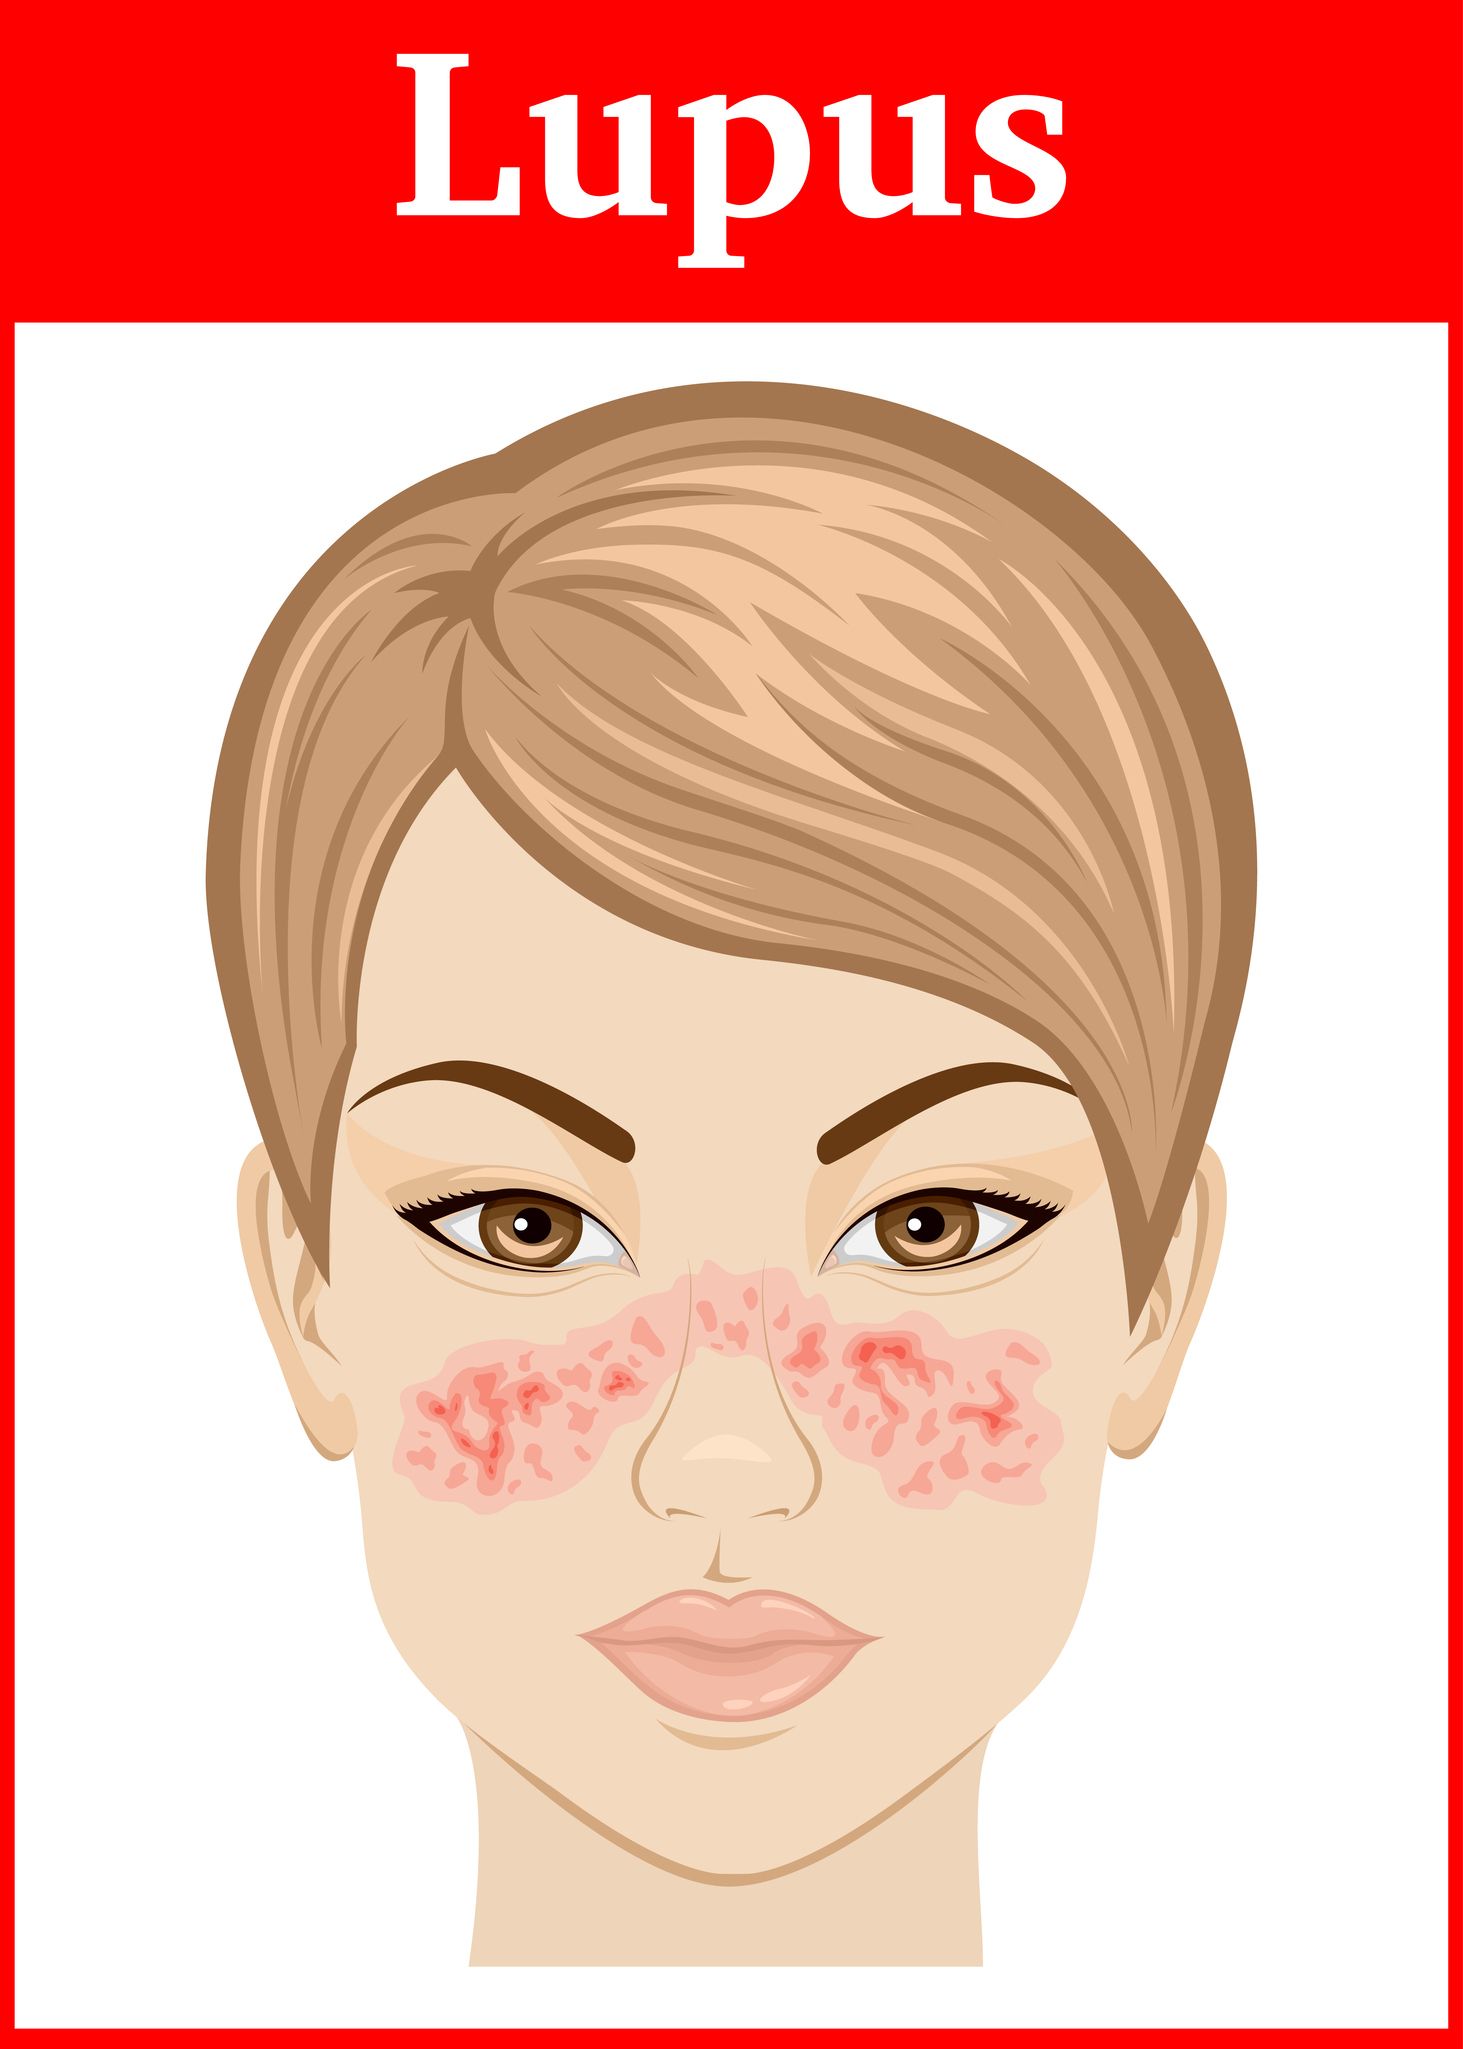 A butterfly-shaped rash that appears on both cheeks and across the bridge of the nose is highly suggestive of lupus.